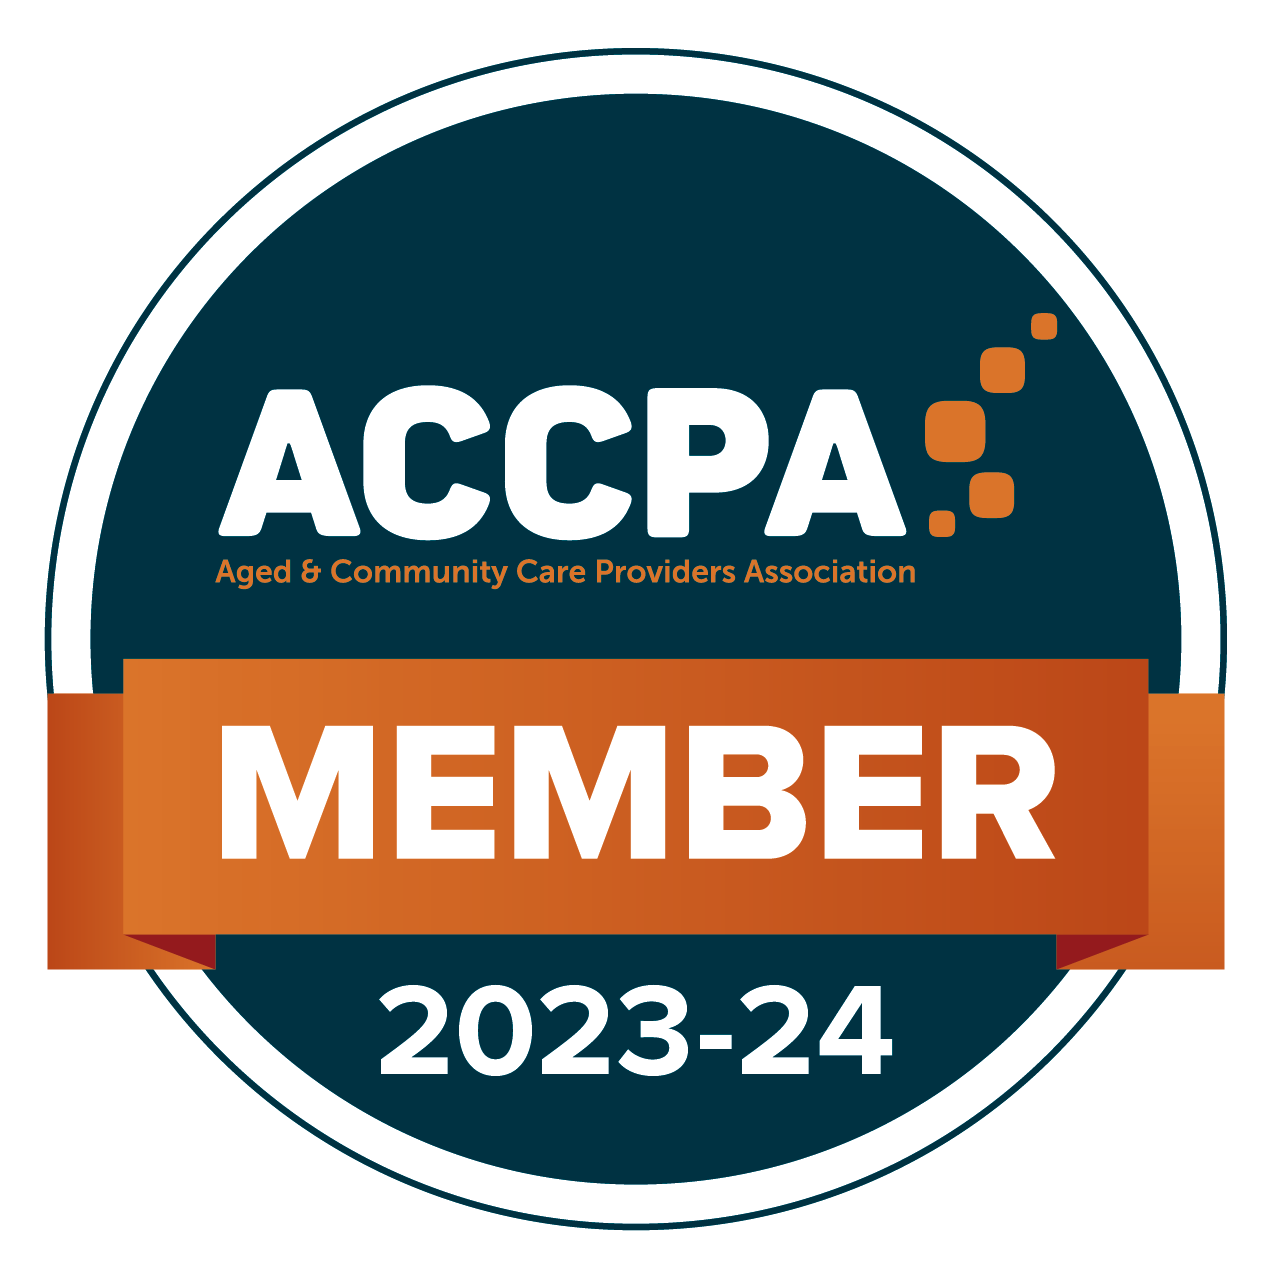 Aged & Community Care Providers Association (ACCPA)